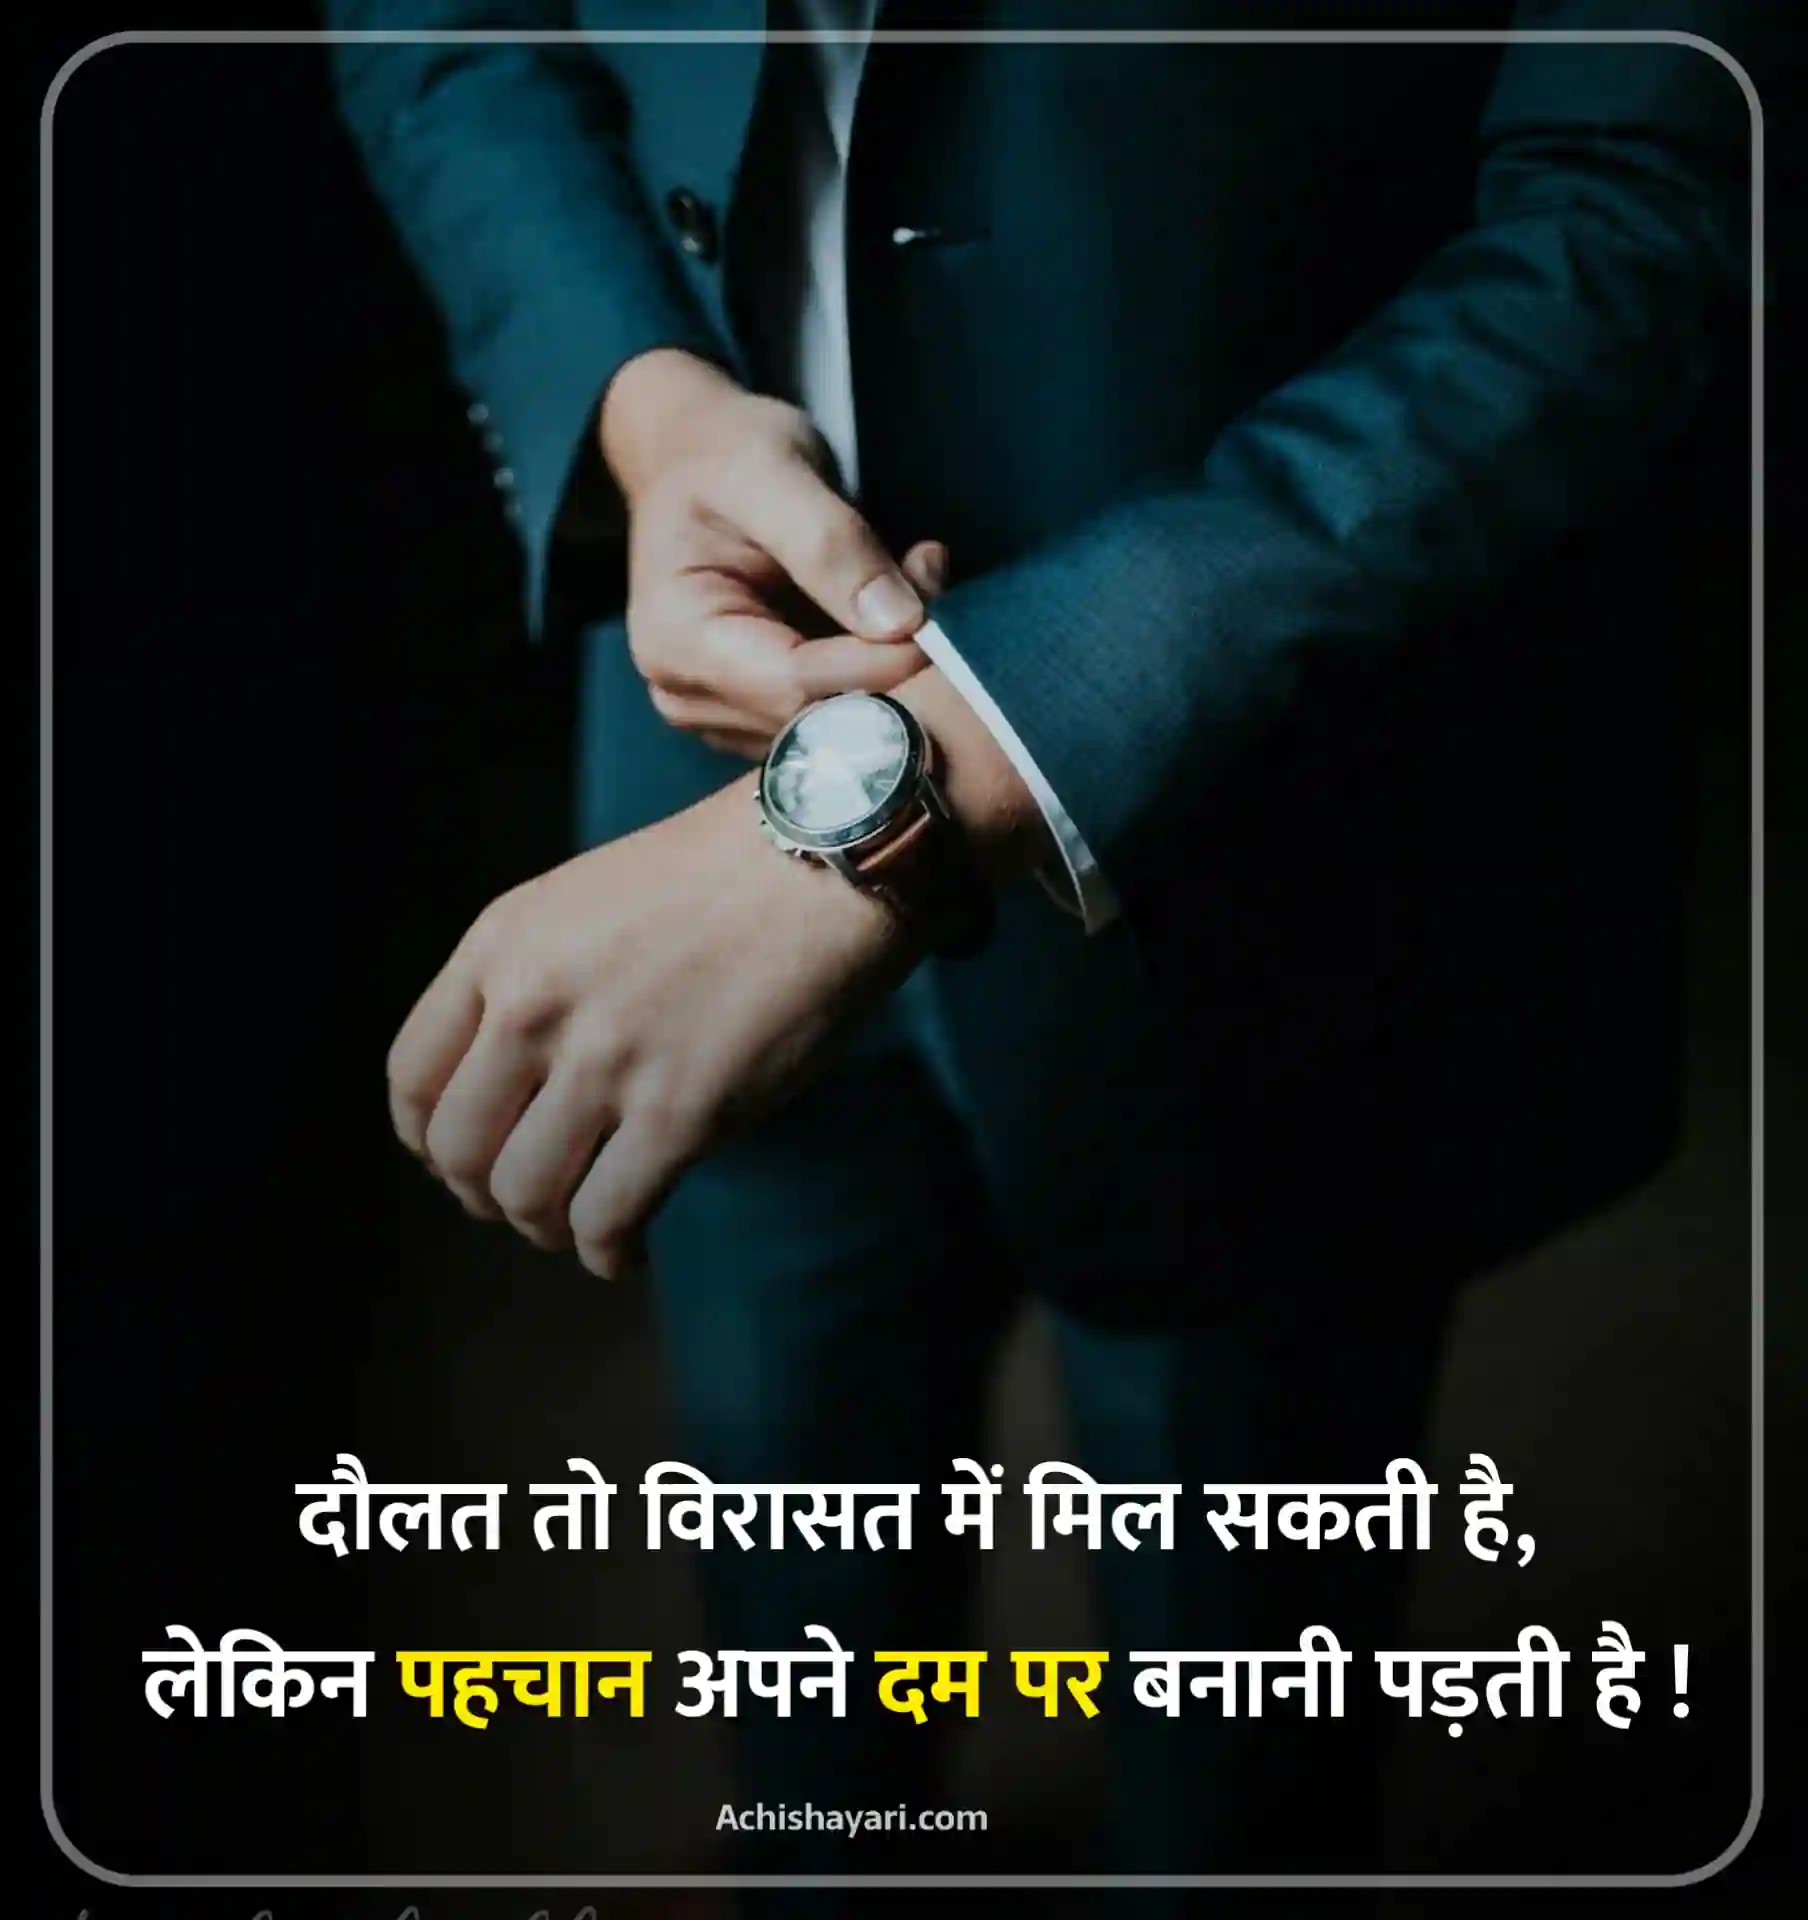 True Lines in Hindi for Life